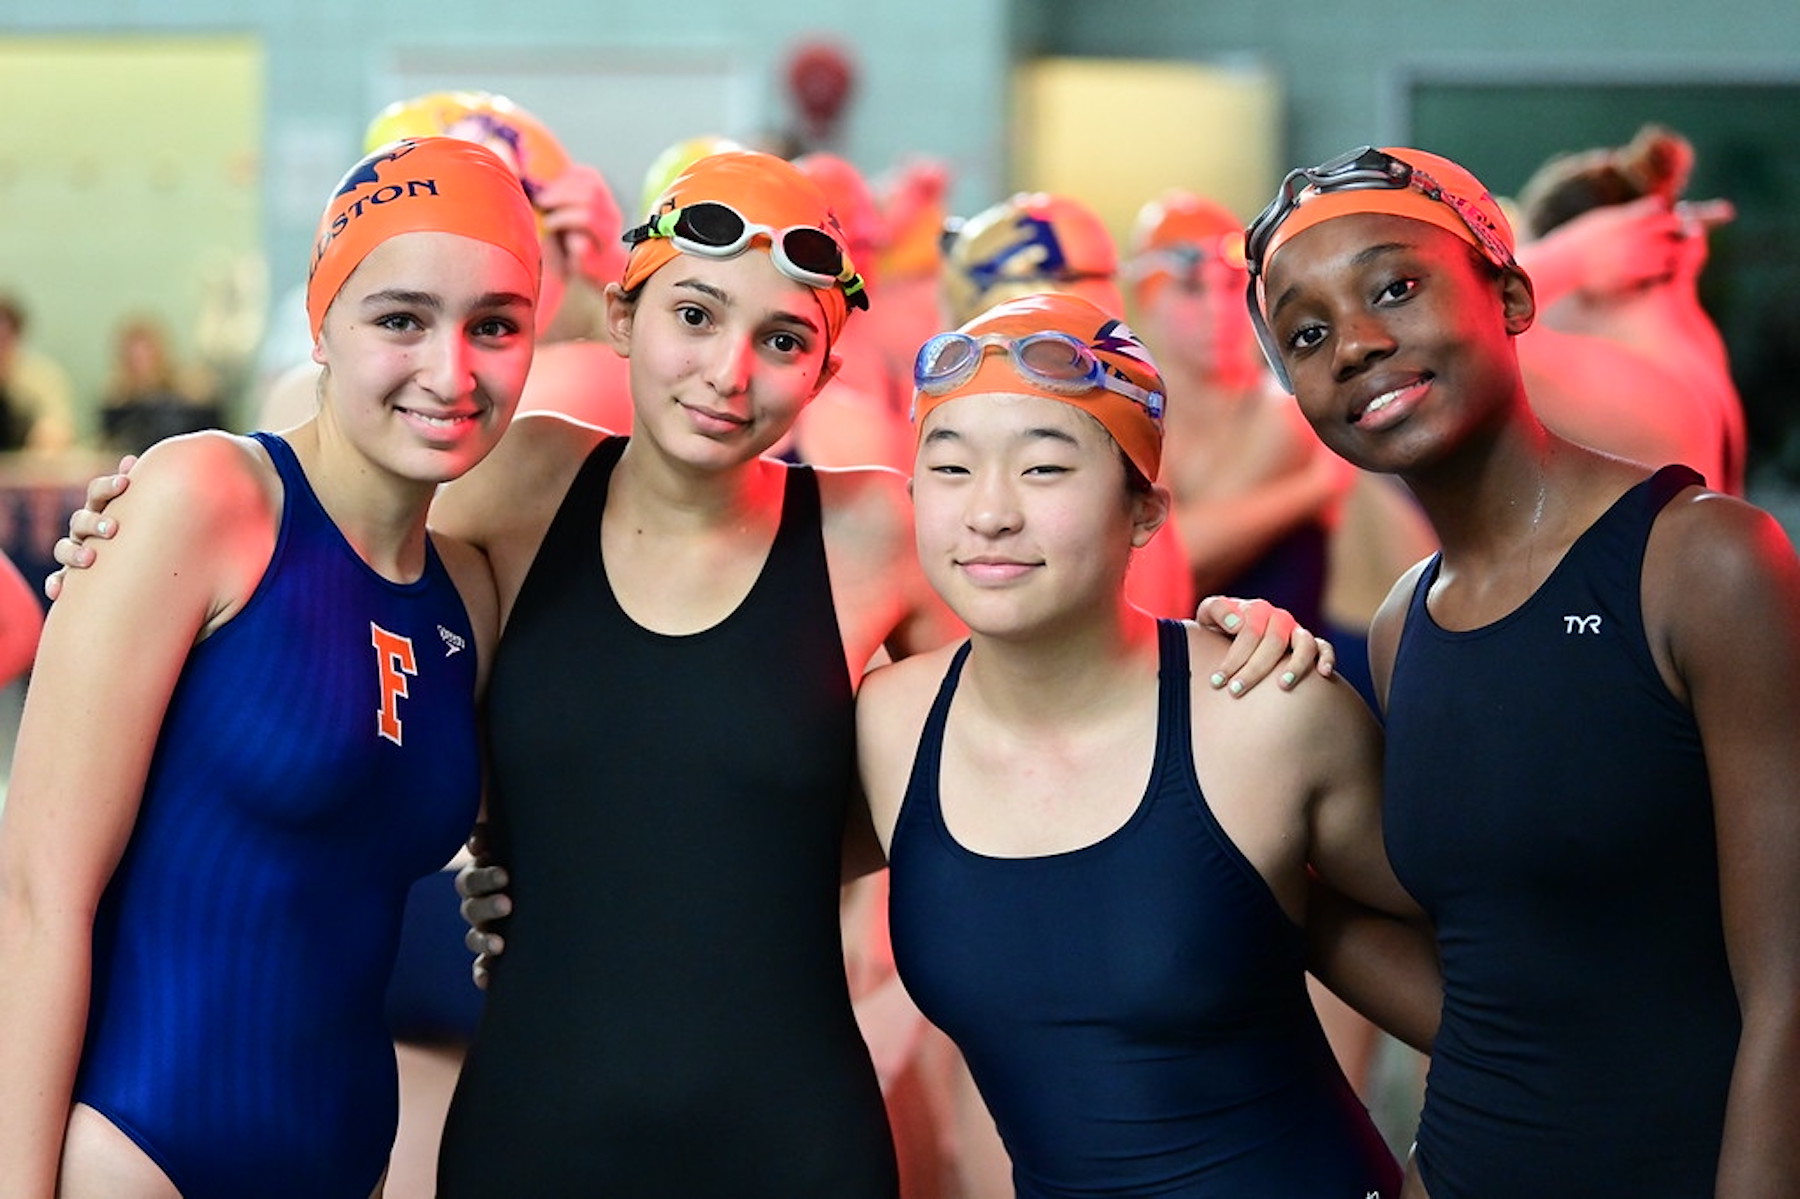 Four Fieldston Upper swimmers pose and smile while looking at the camera.